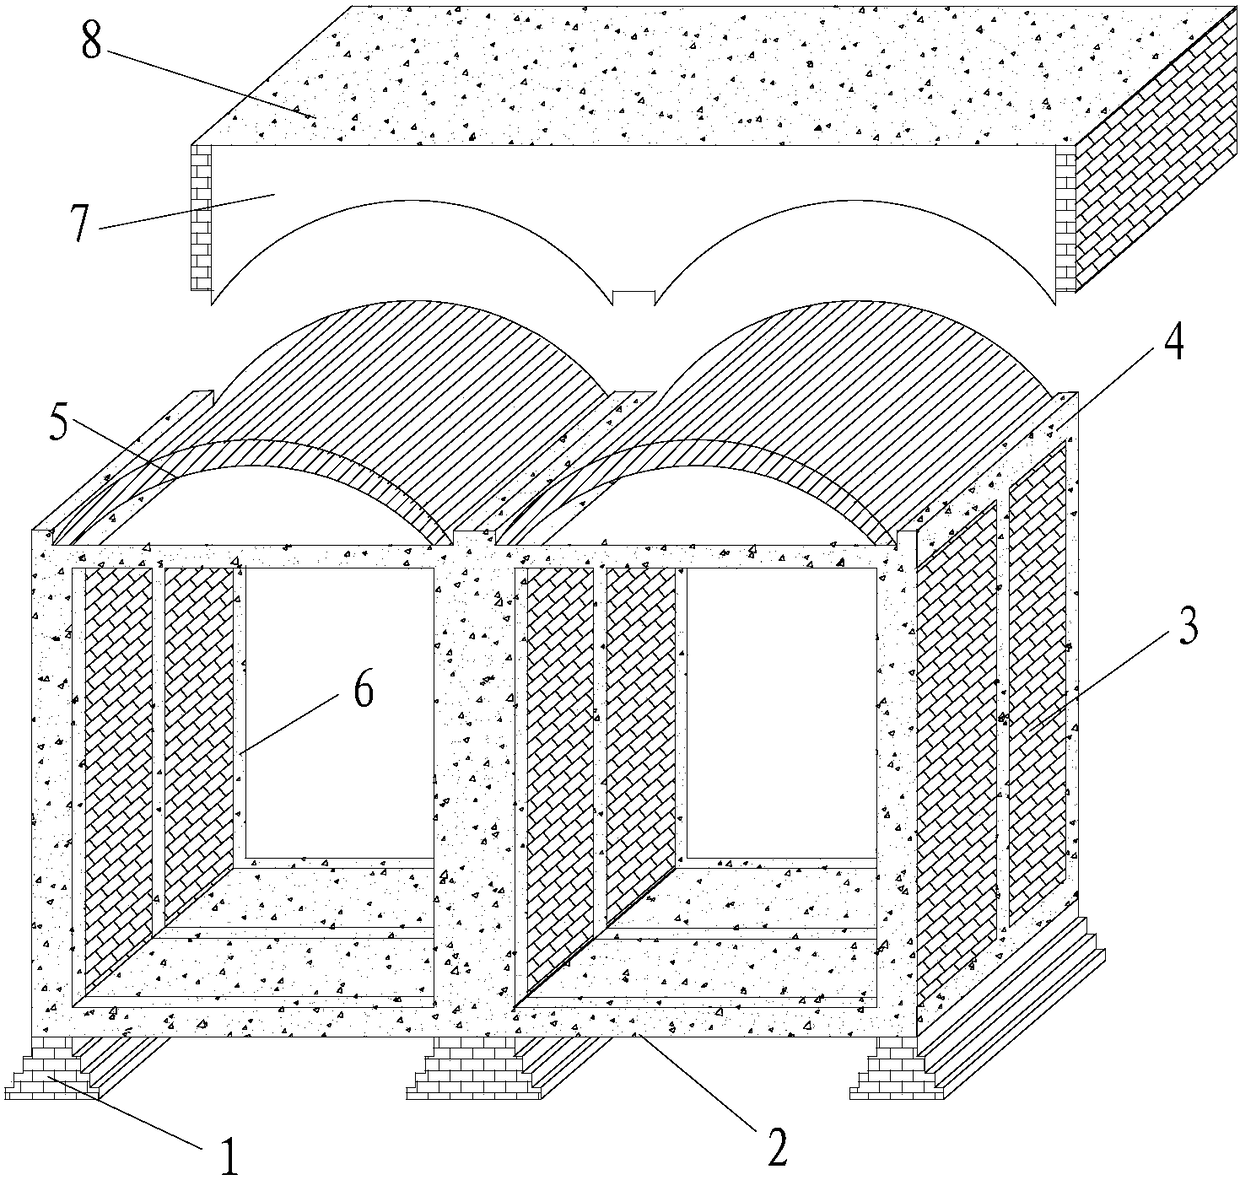 A method for constructing an independent brick masonry earthquake-resistant cave dwelling